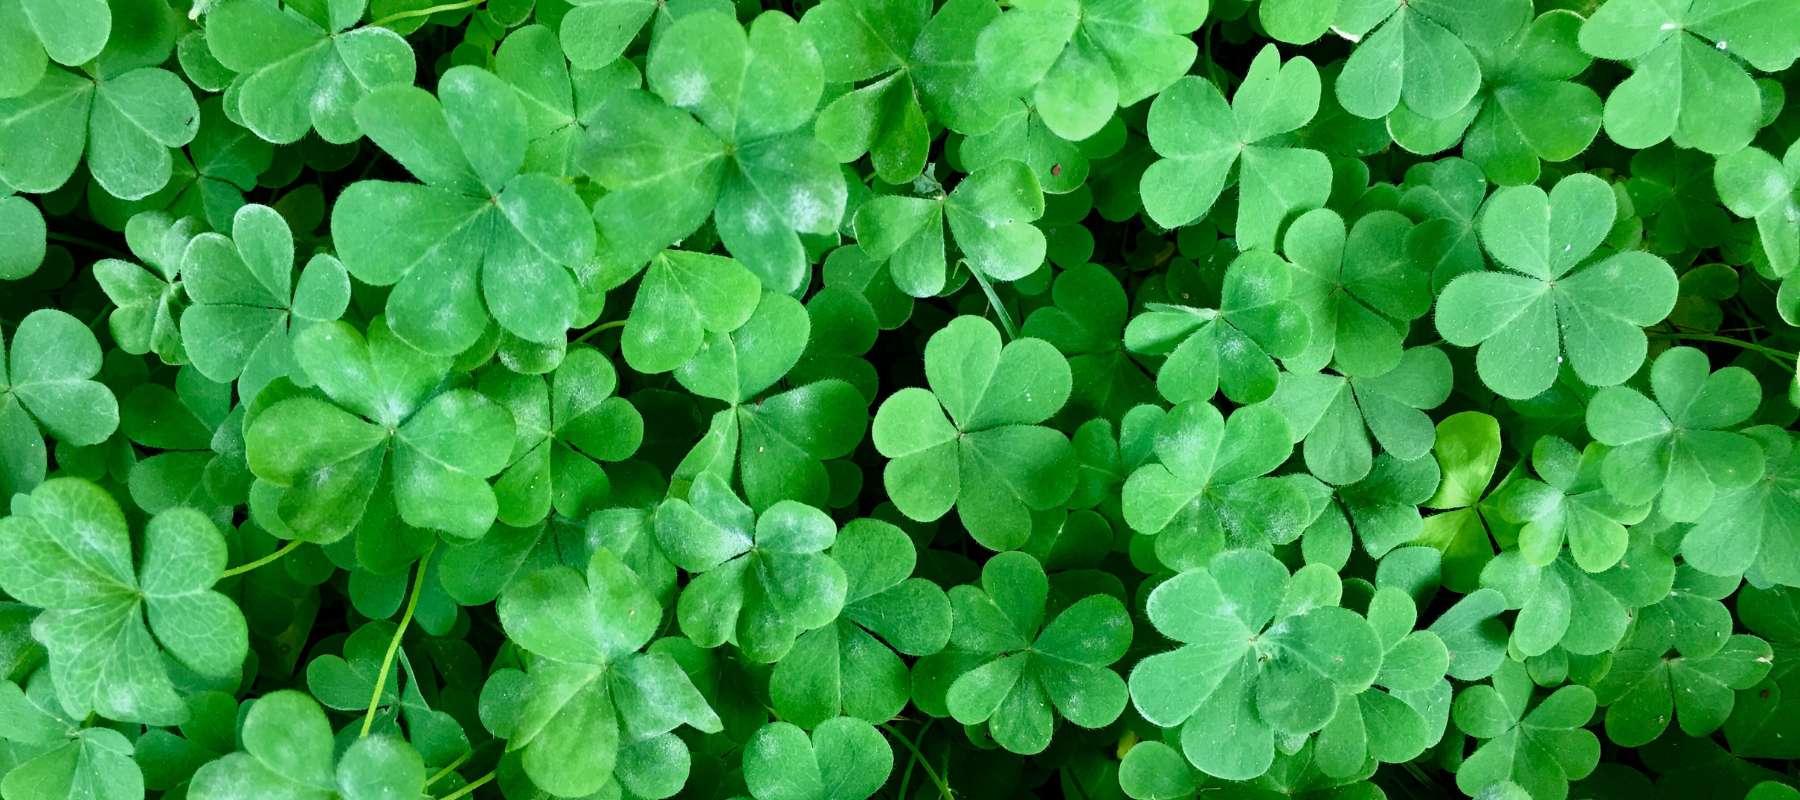 Why Grow Clover? The Surprising Benefits for Your Garden and Lawn